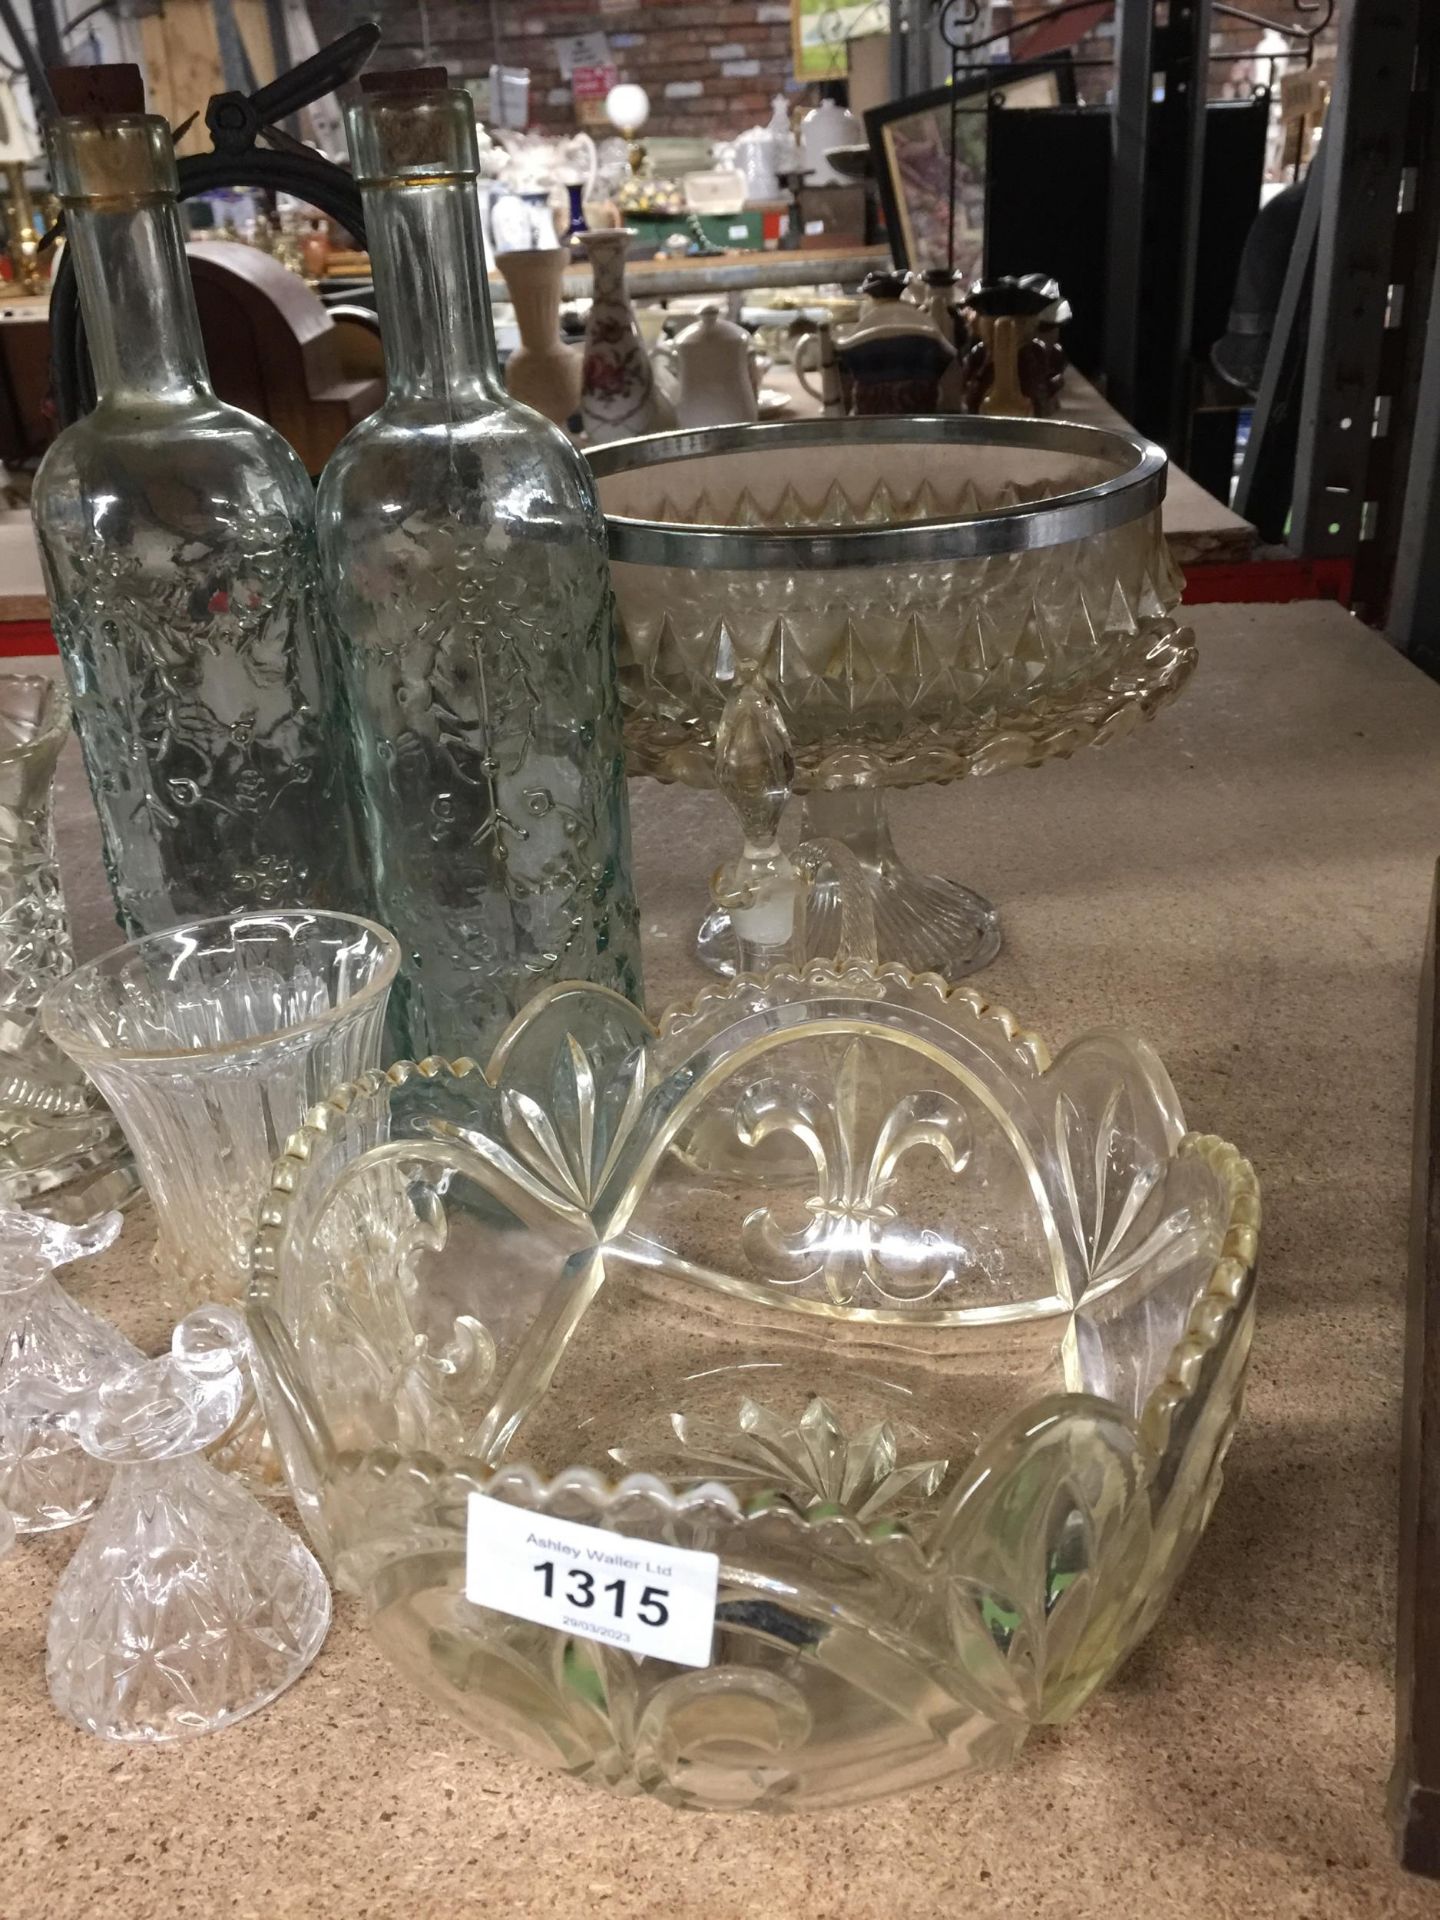 A QUANTITY OF GLASSWARE TO INCLUDE BOWLS, VASES, BOTTLES, ORNAMENTS TOGETHER WITH A BOTTLE RACK - Image 3 of 3